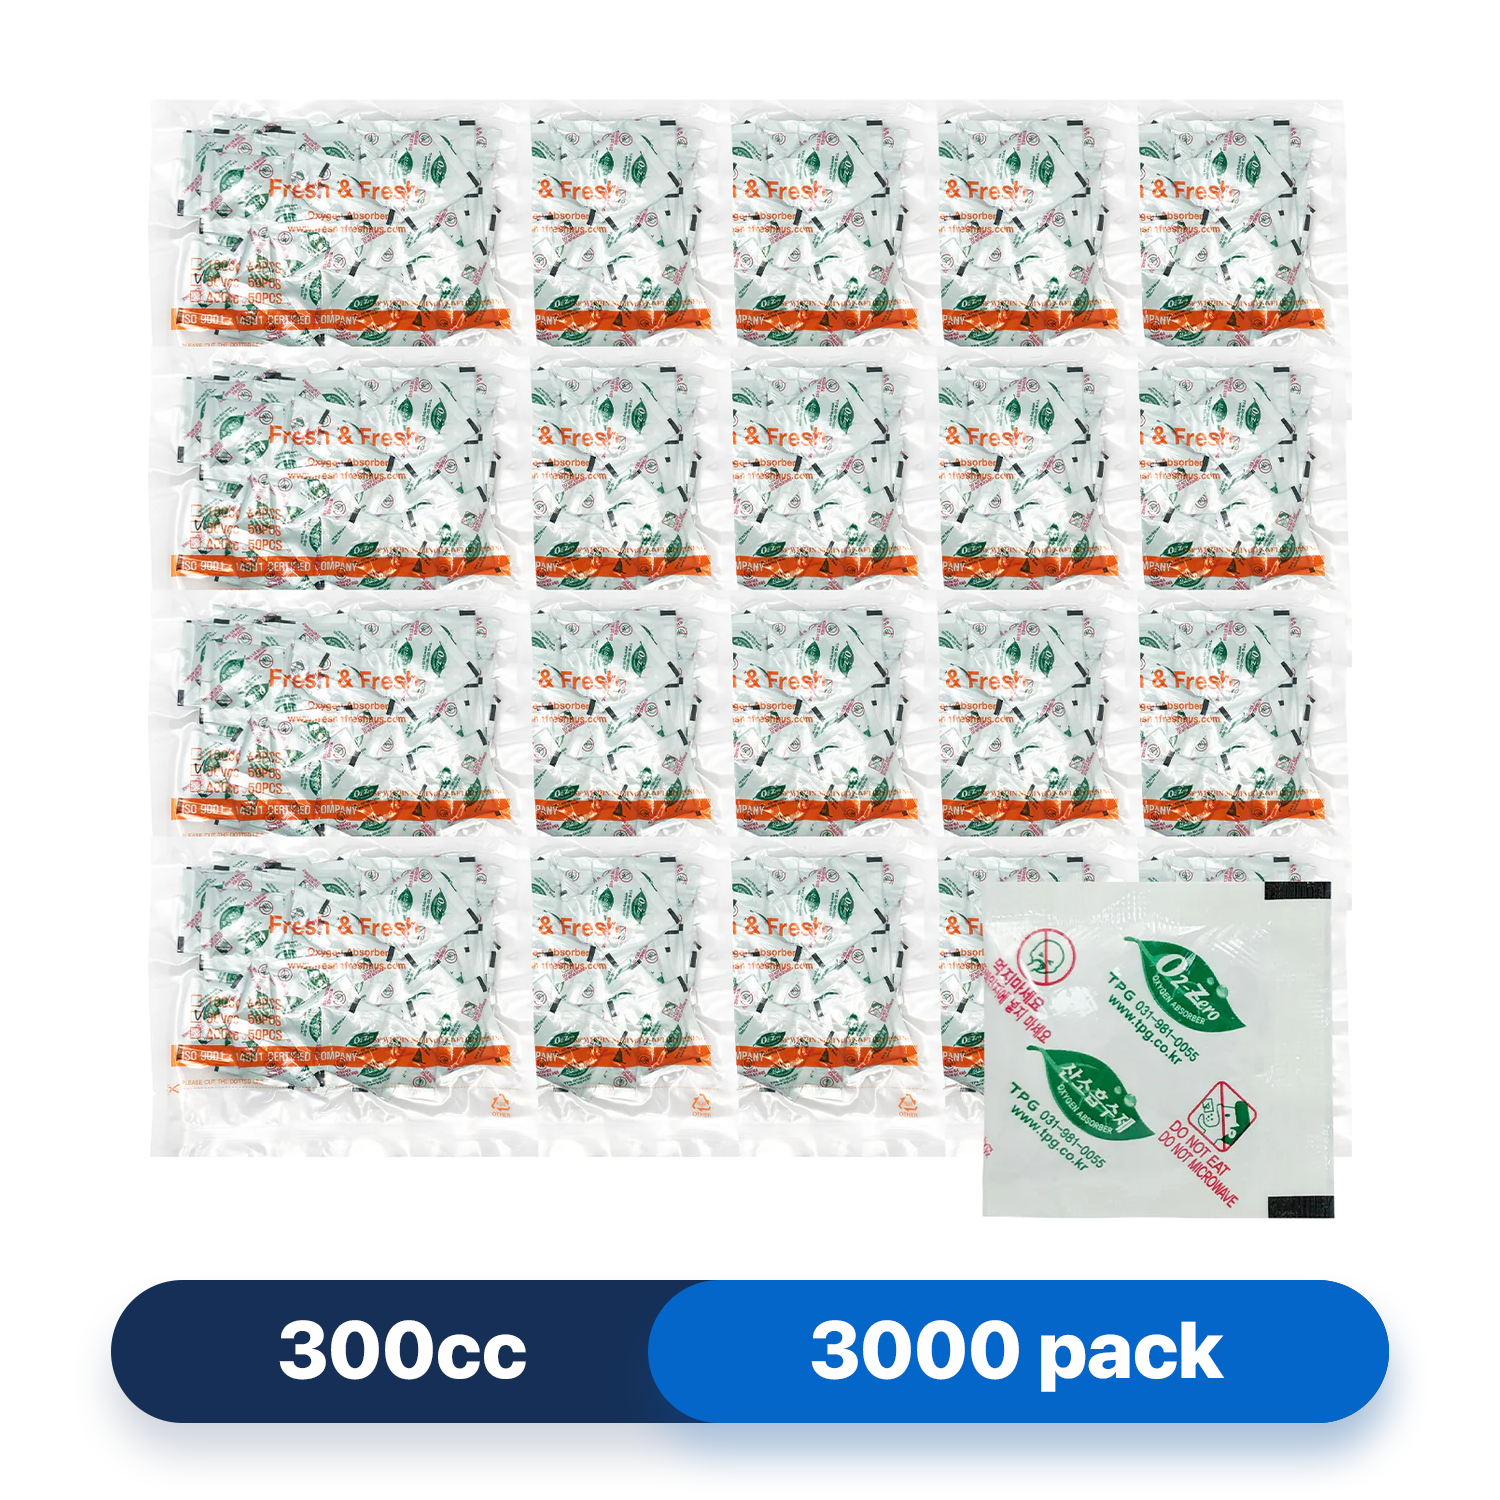 Fresh & Fresh (3000 Packs) 300 CC Premium Oxygen Absorbers(60 Bag of 50 Packets) - ISO 9001 & 14001 Certified Facility Manufactured